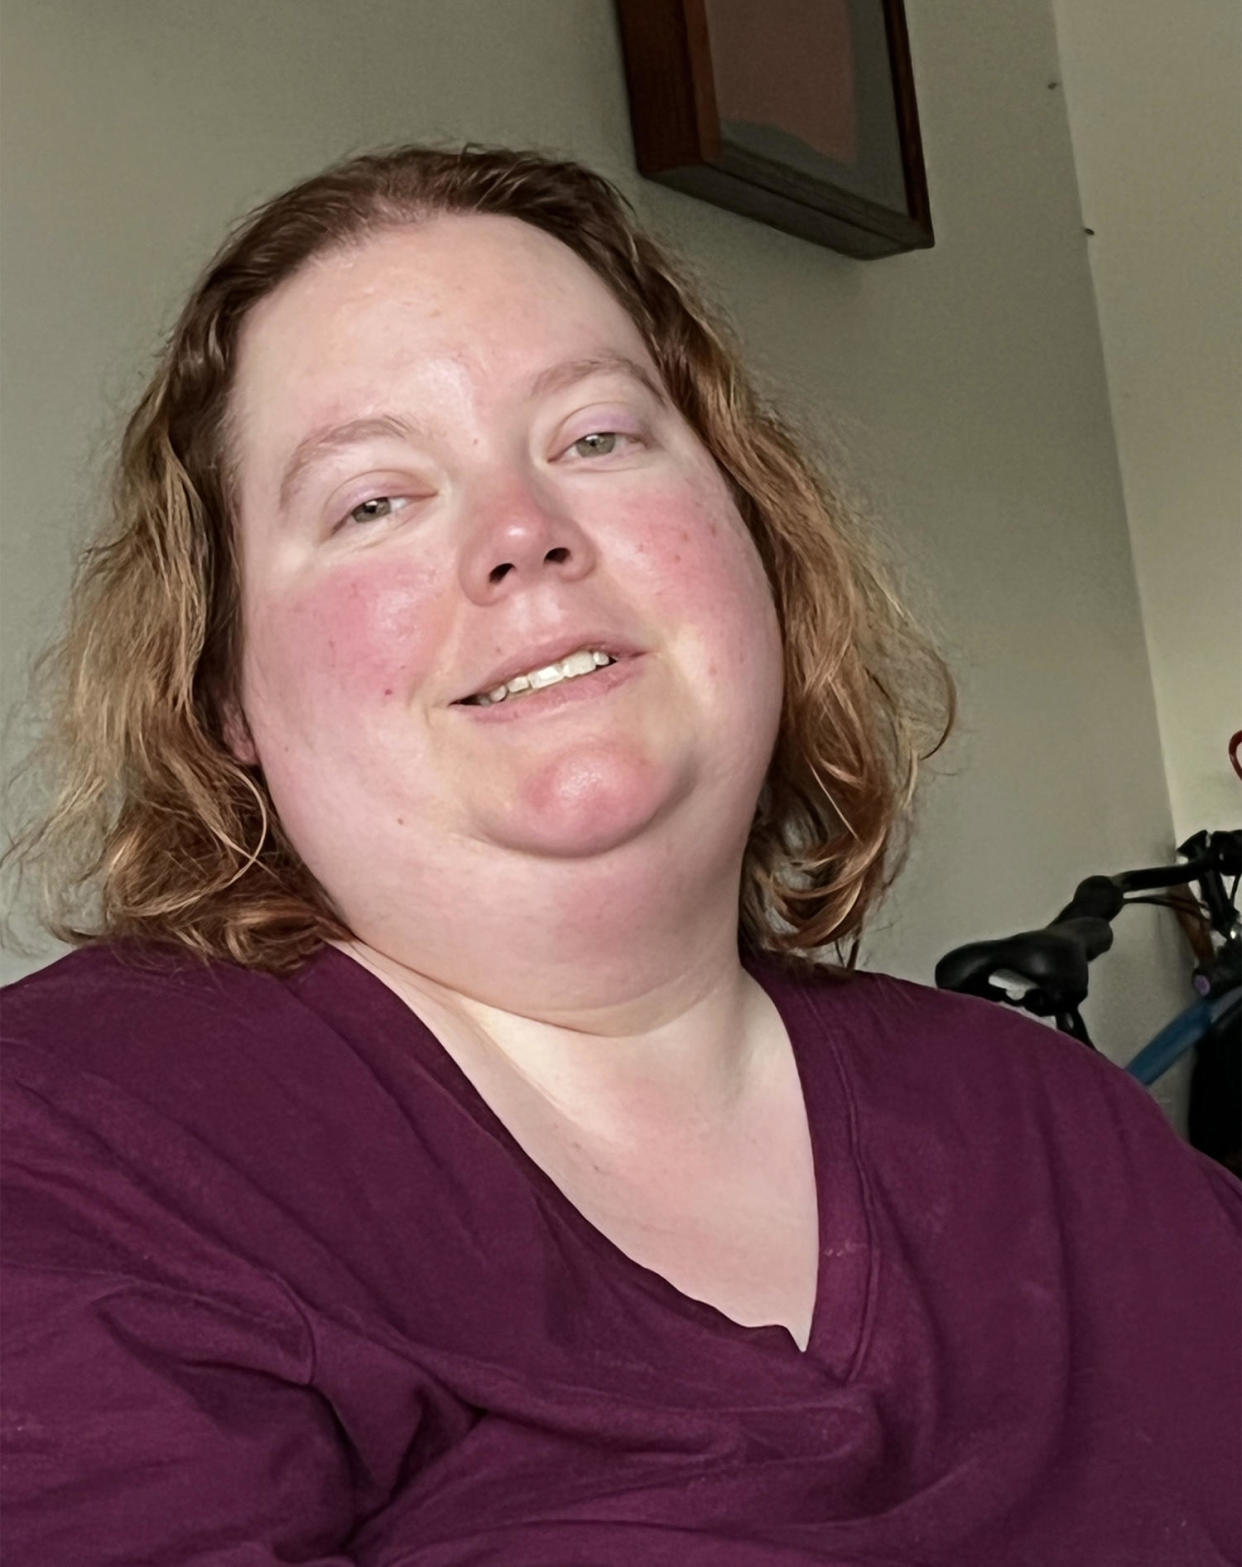 After a diabetes diagnosis scared her, this mom lost 130 pounds and now walks 5 miles every day (Courtesy Kristi Ledgerwood)